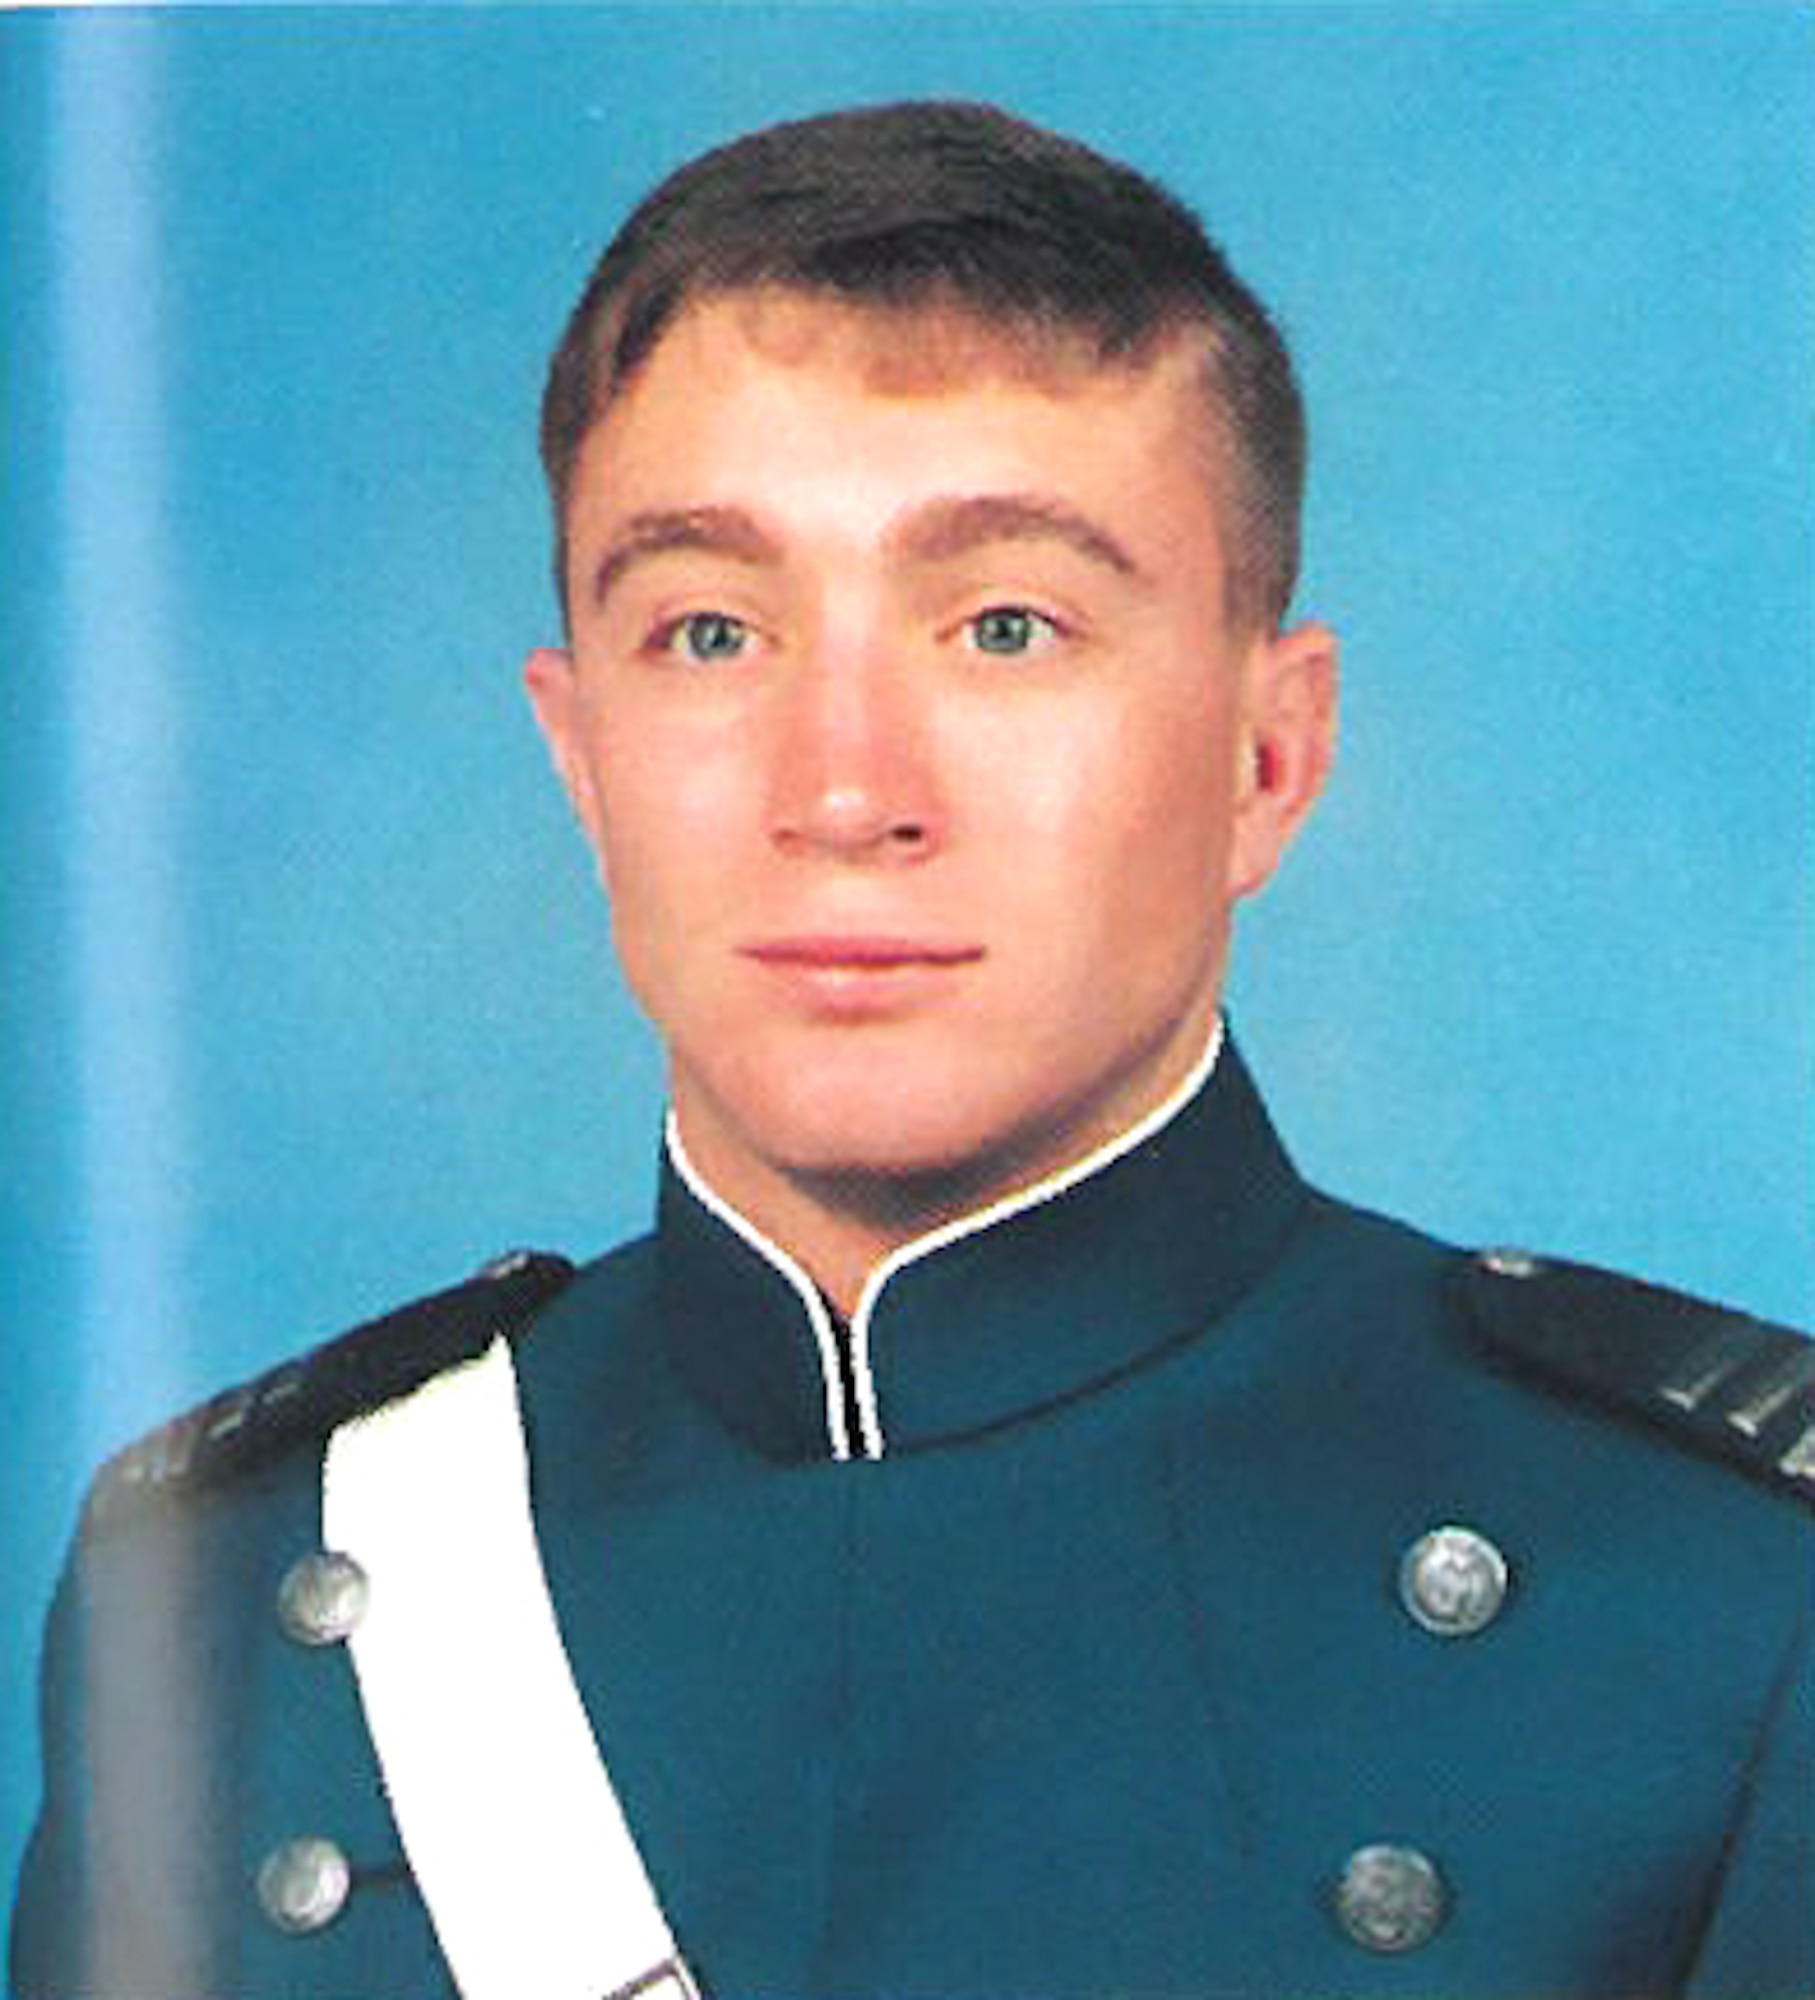 Lt. Col. Frank Bryant, USAFA class of 1995, was killed in Kabul, Afghanistan Wednesday, April 27, 2011. Colonel Bryant was serving on a NATO team training the Afghan Air Force in support of Operation Enduring Freedom. He is pictured here in his first class cadet photo. 